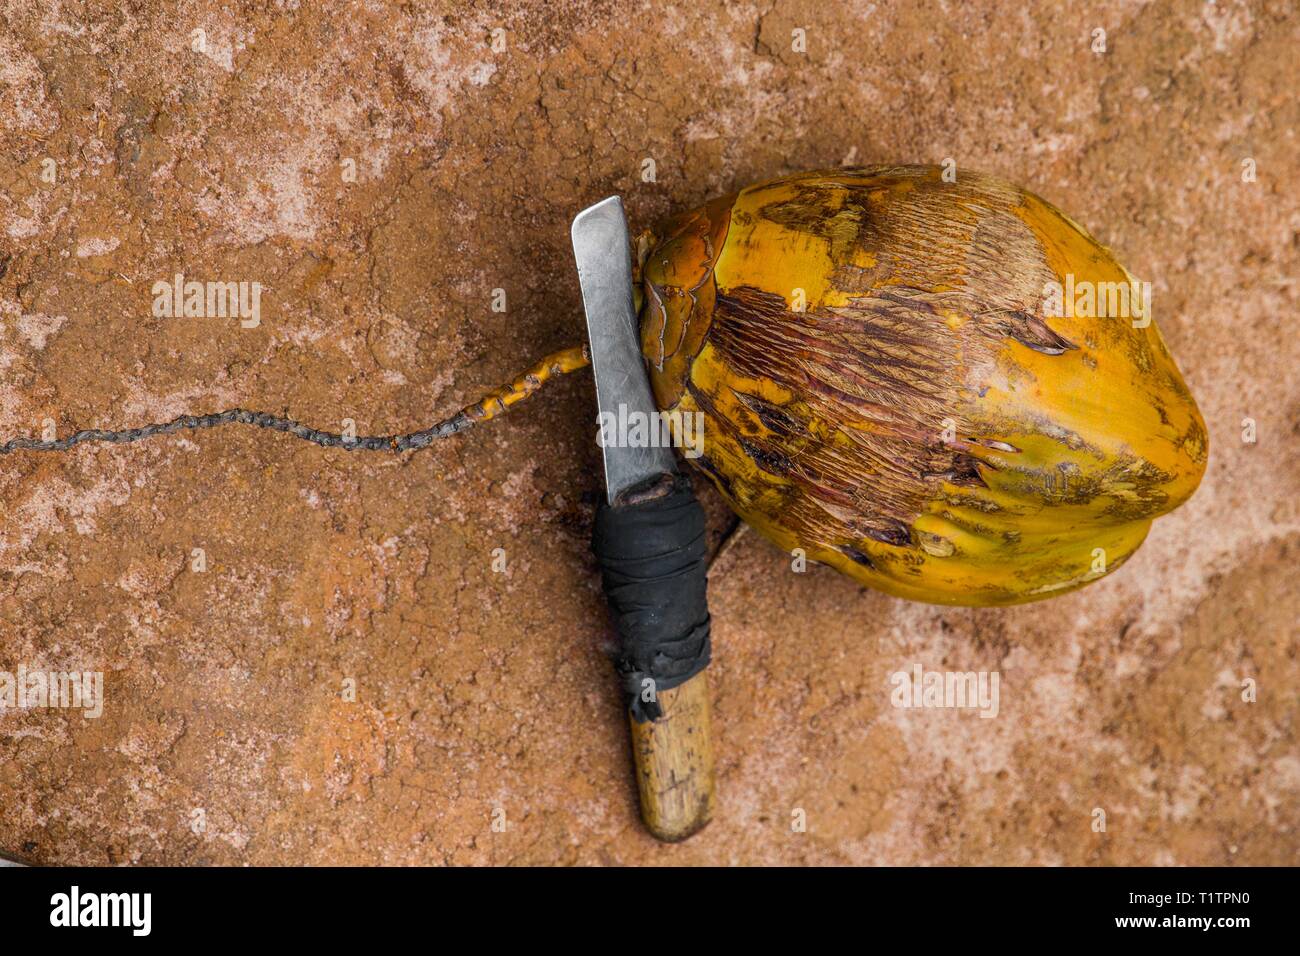 one big coco nut in the shell with the hand made knife Stock Photo